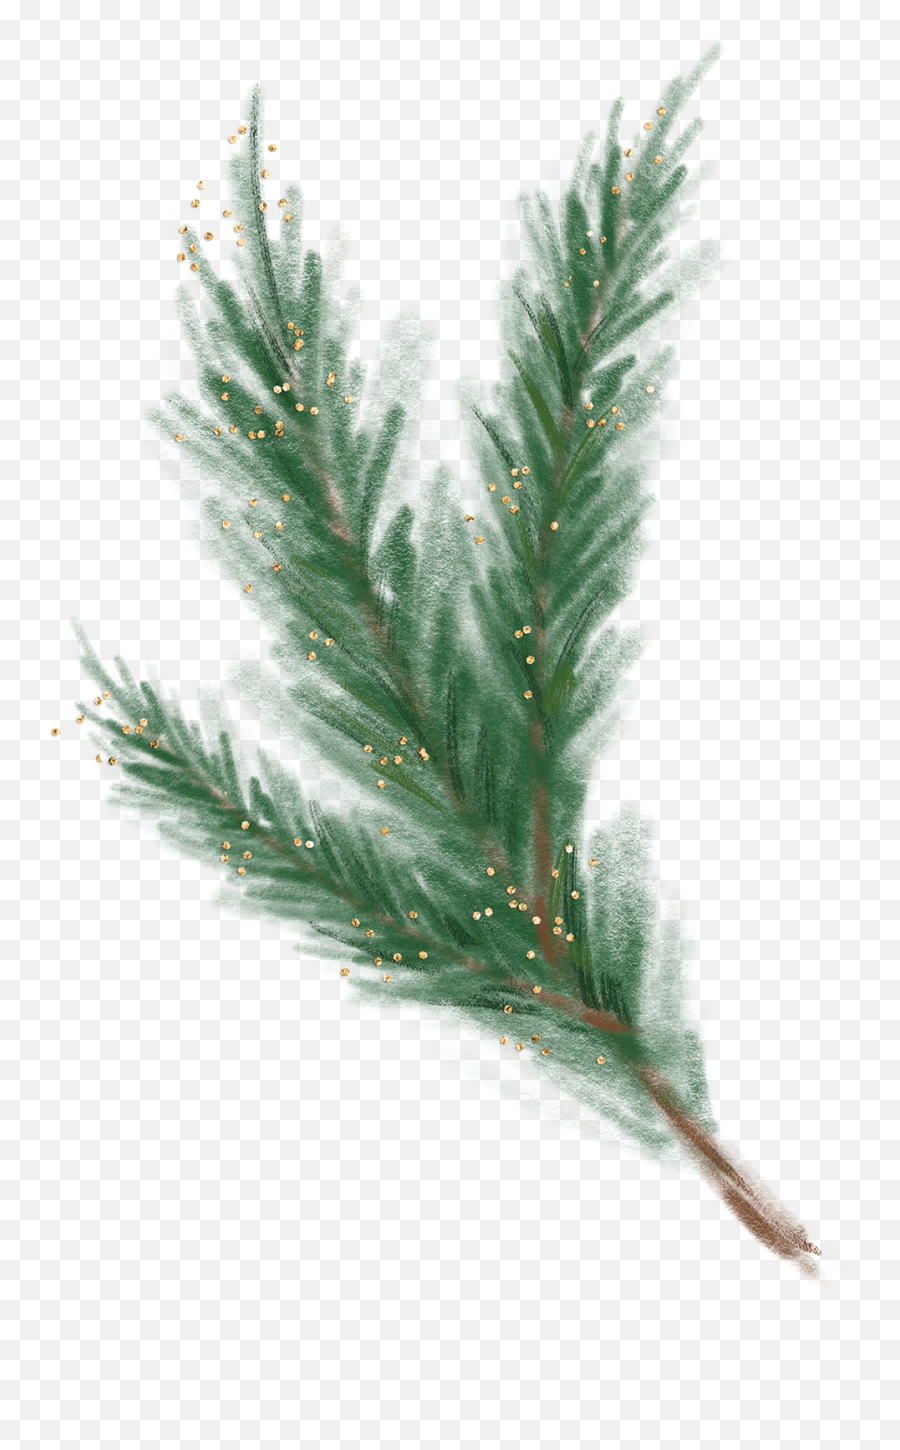 Branch Christmastree Conifer Sticker By Stacey4790 Emoji,Cypress Tree Clipart